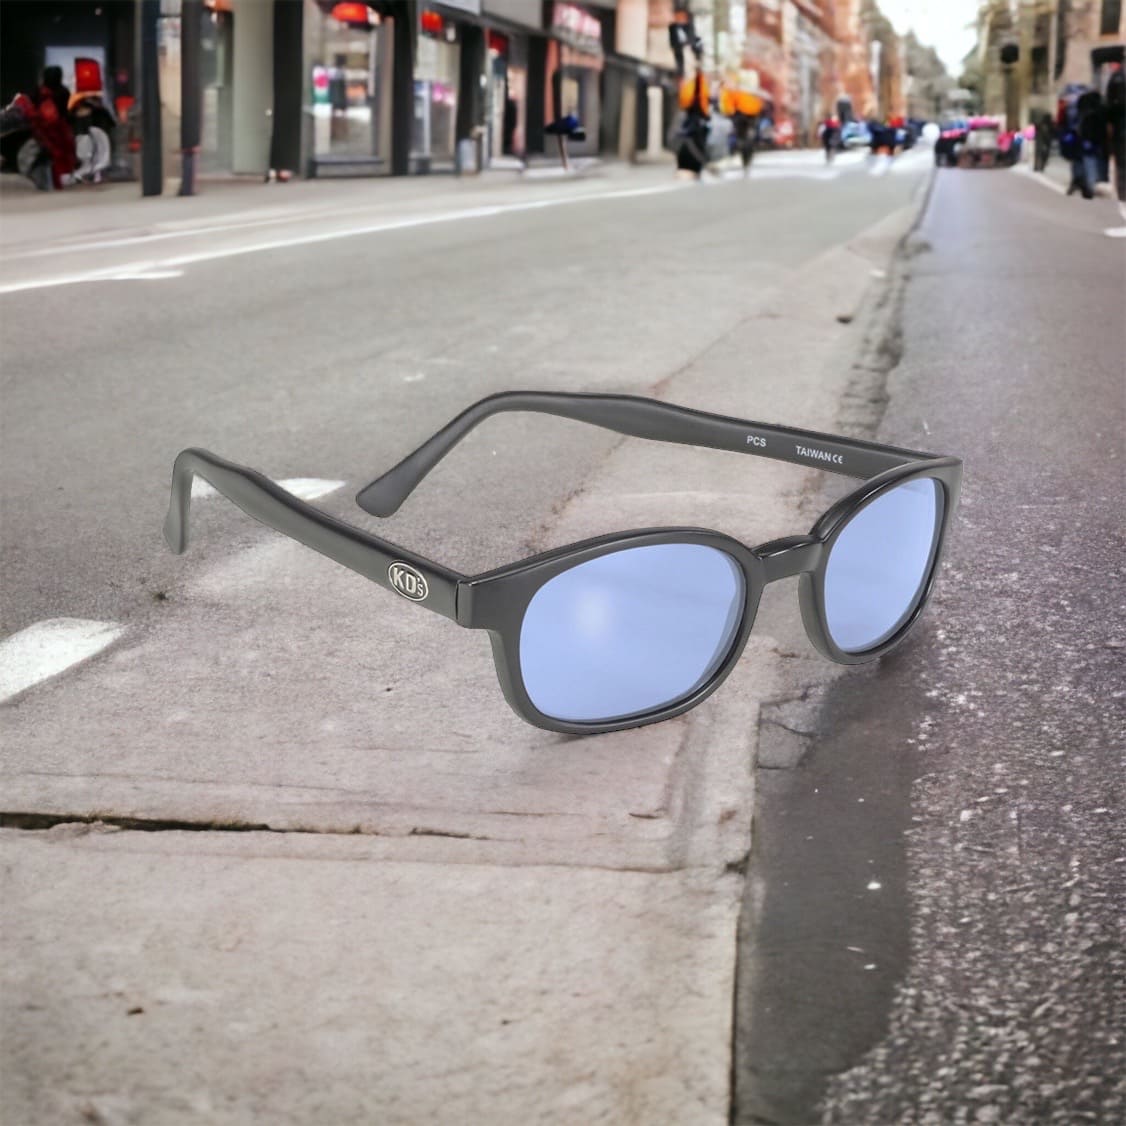 KD's 20012 sunglasses that fit under a motorcycle or ski helmet. With a durable matte black frame and blue tinted polycarbonate lenses set on the road in the street.